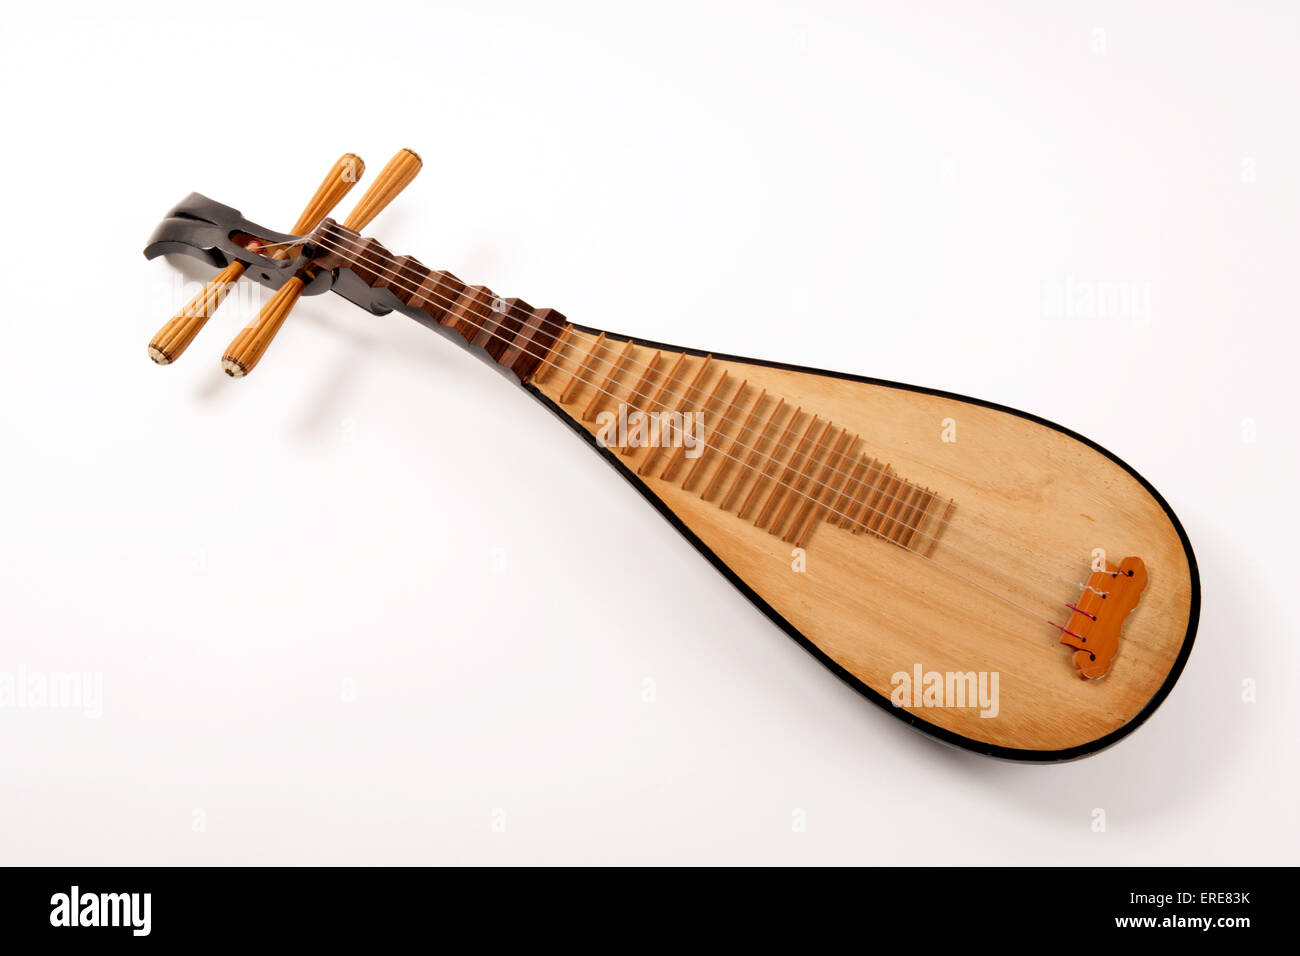 Chinese Pipa, or short-necked lute, tradtional instrument of china made  with shallow piriform body, wooden soundboard and frets Stock Photo - Alamy